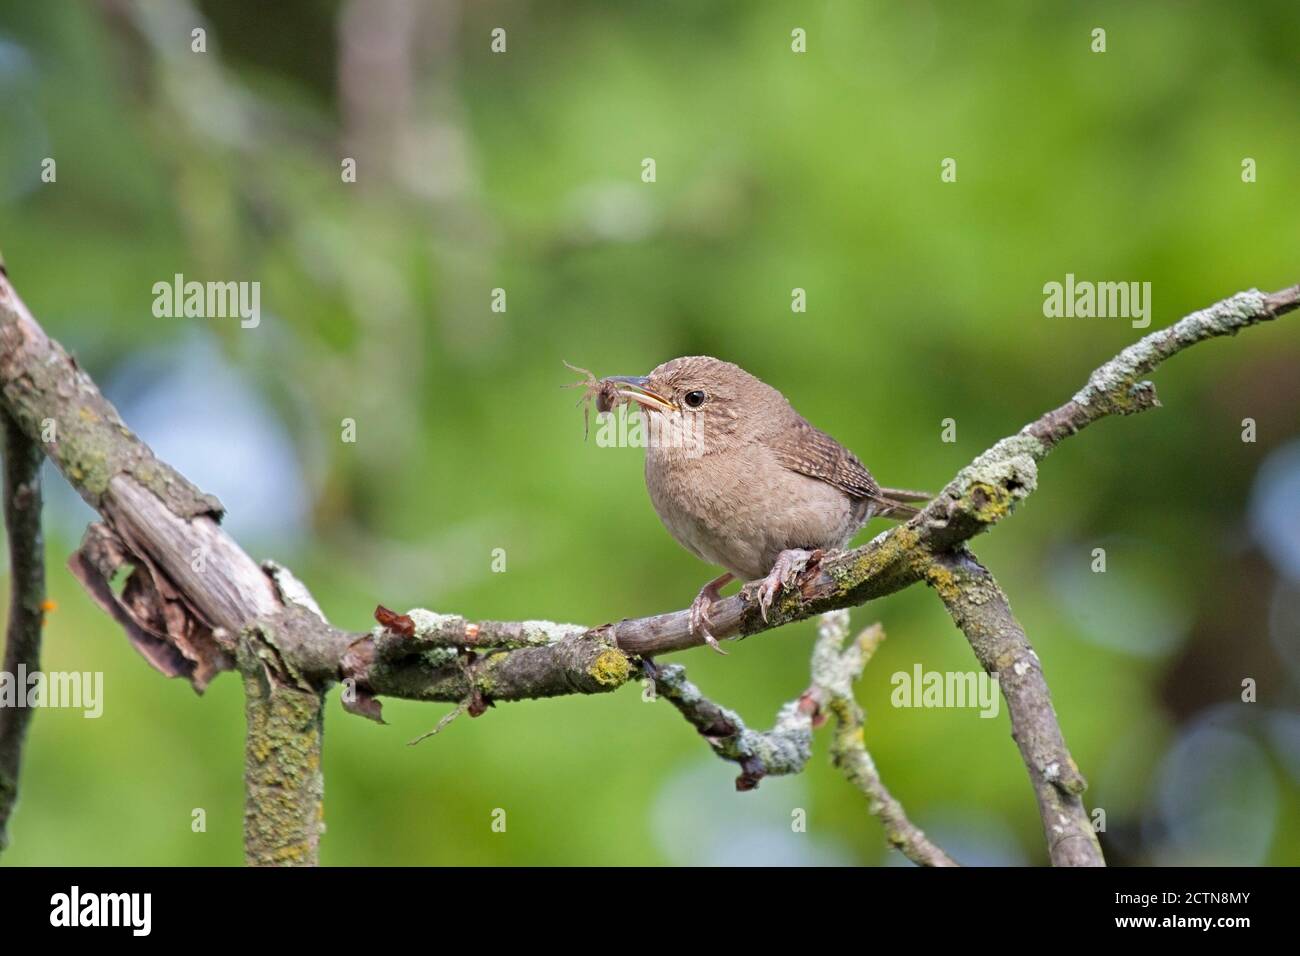 A house wren holds a spider in its beak while perched on a branch. Green background of the springtime leaves. Stock Photo